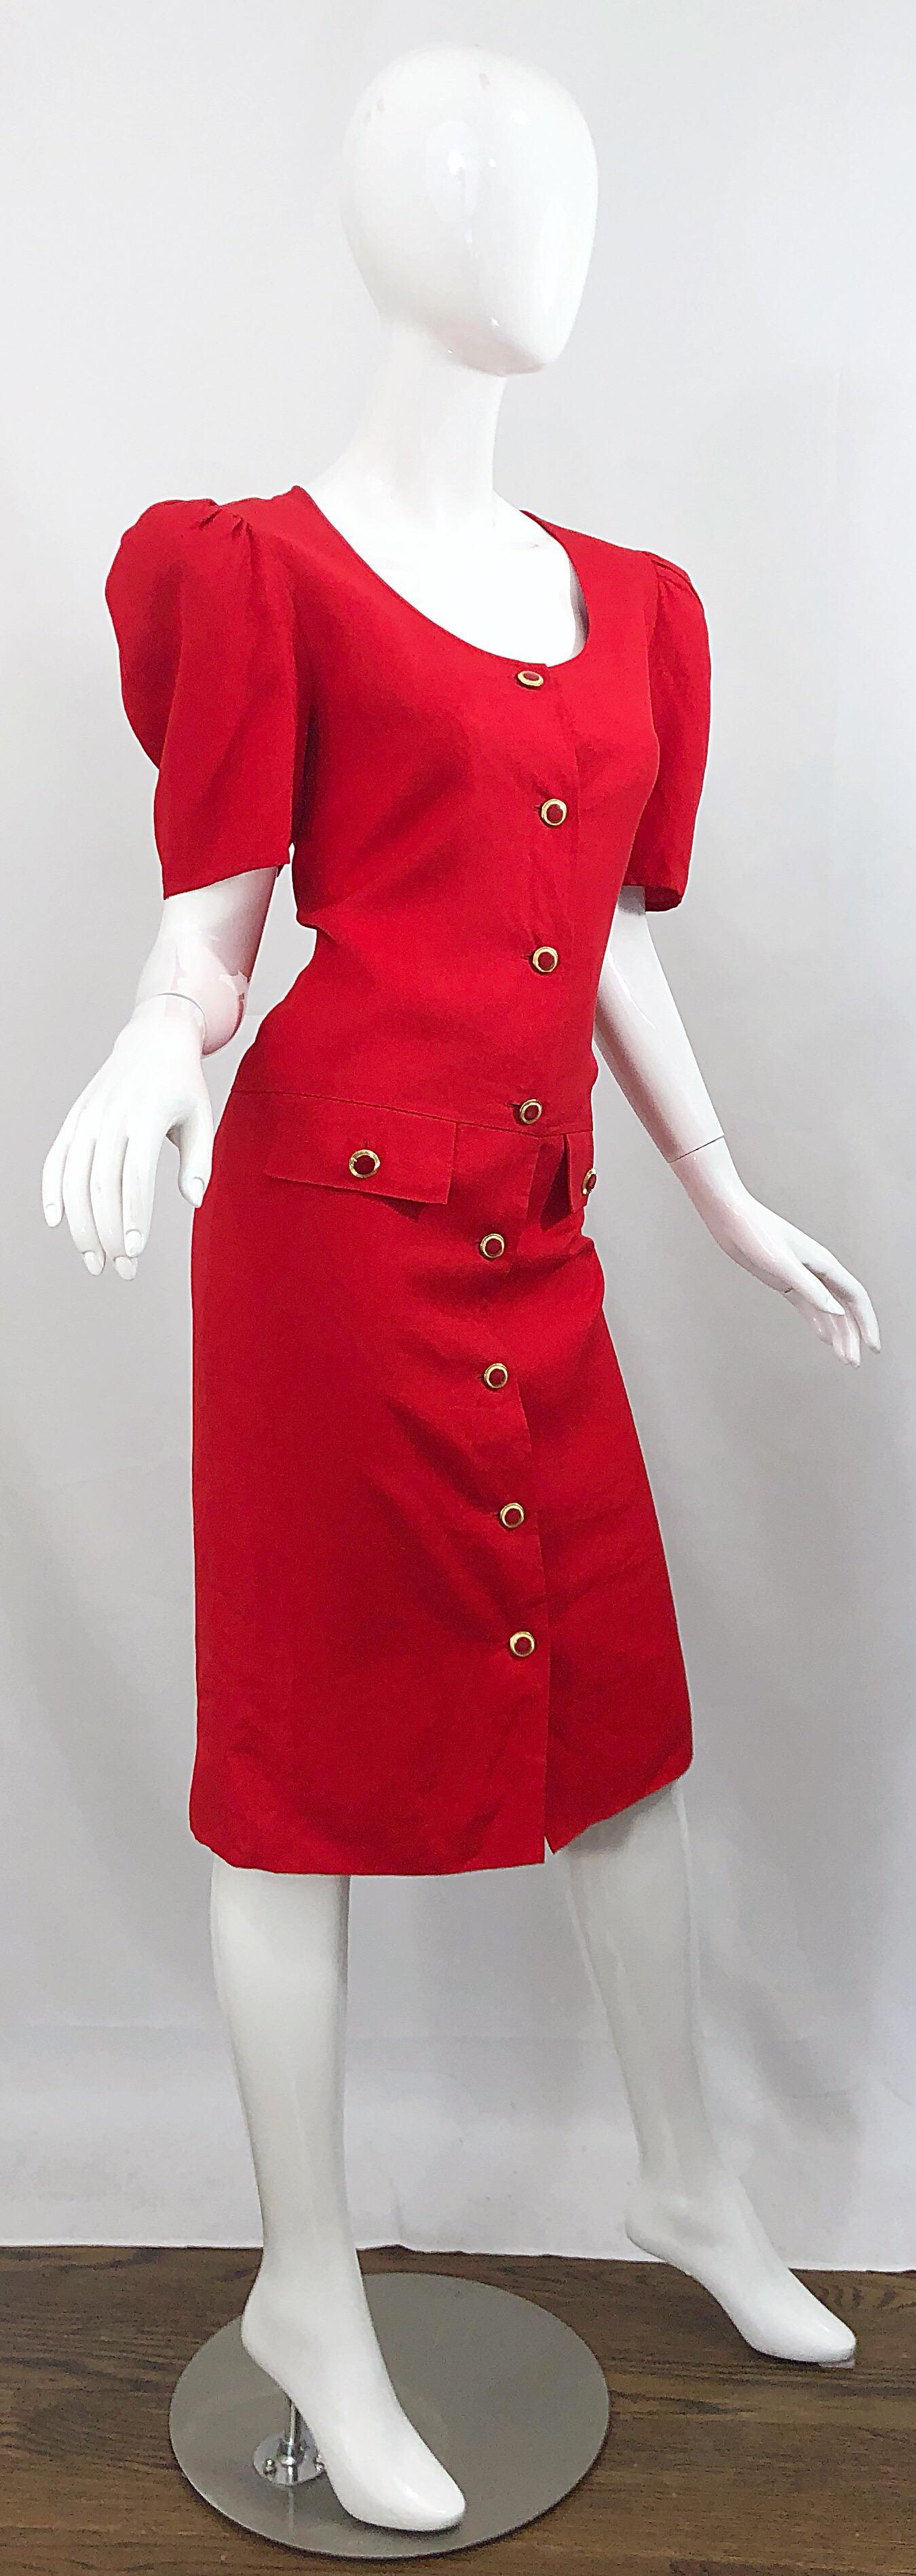 Vintage Adele Simpson I Magnin 1980s Size 10 Lipstick Red Linen Rayon 90s Dress In Excellent Condition For Sale In San Diego, CA